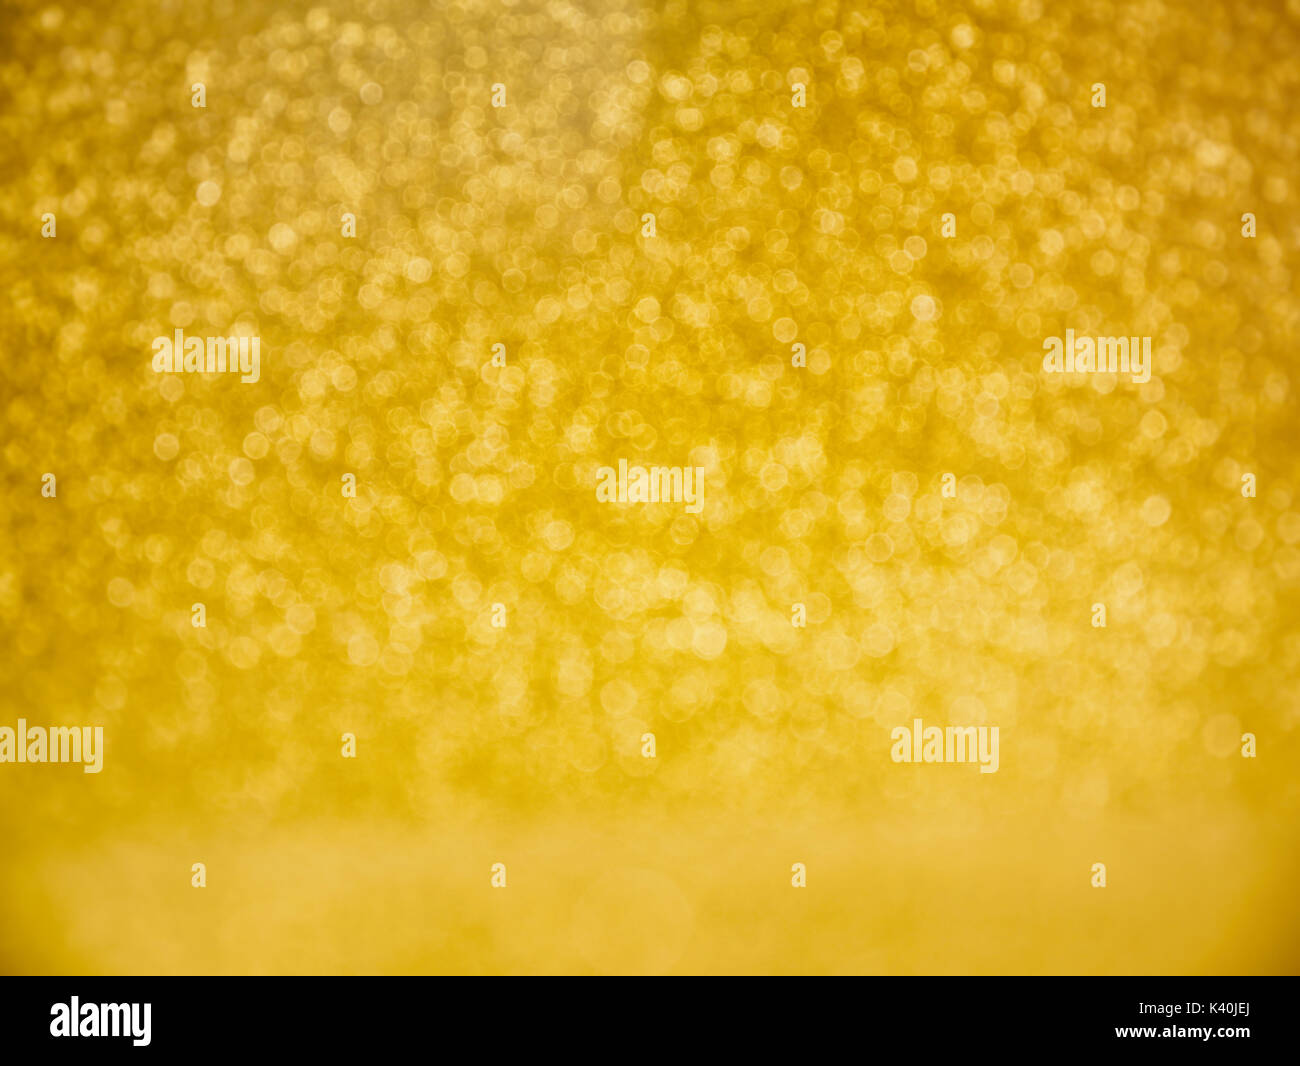 Gold Glitter Background for christmas celebrate glowing backdrop design Stock Photo